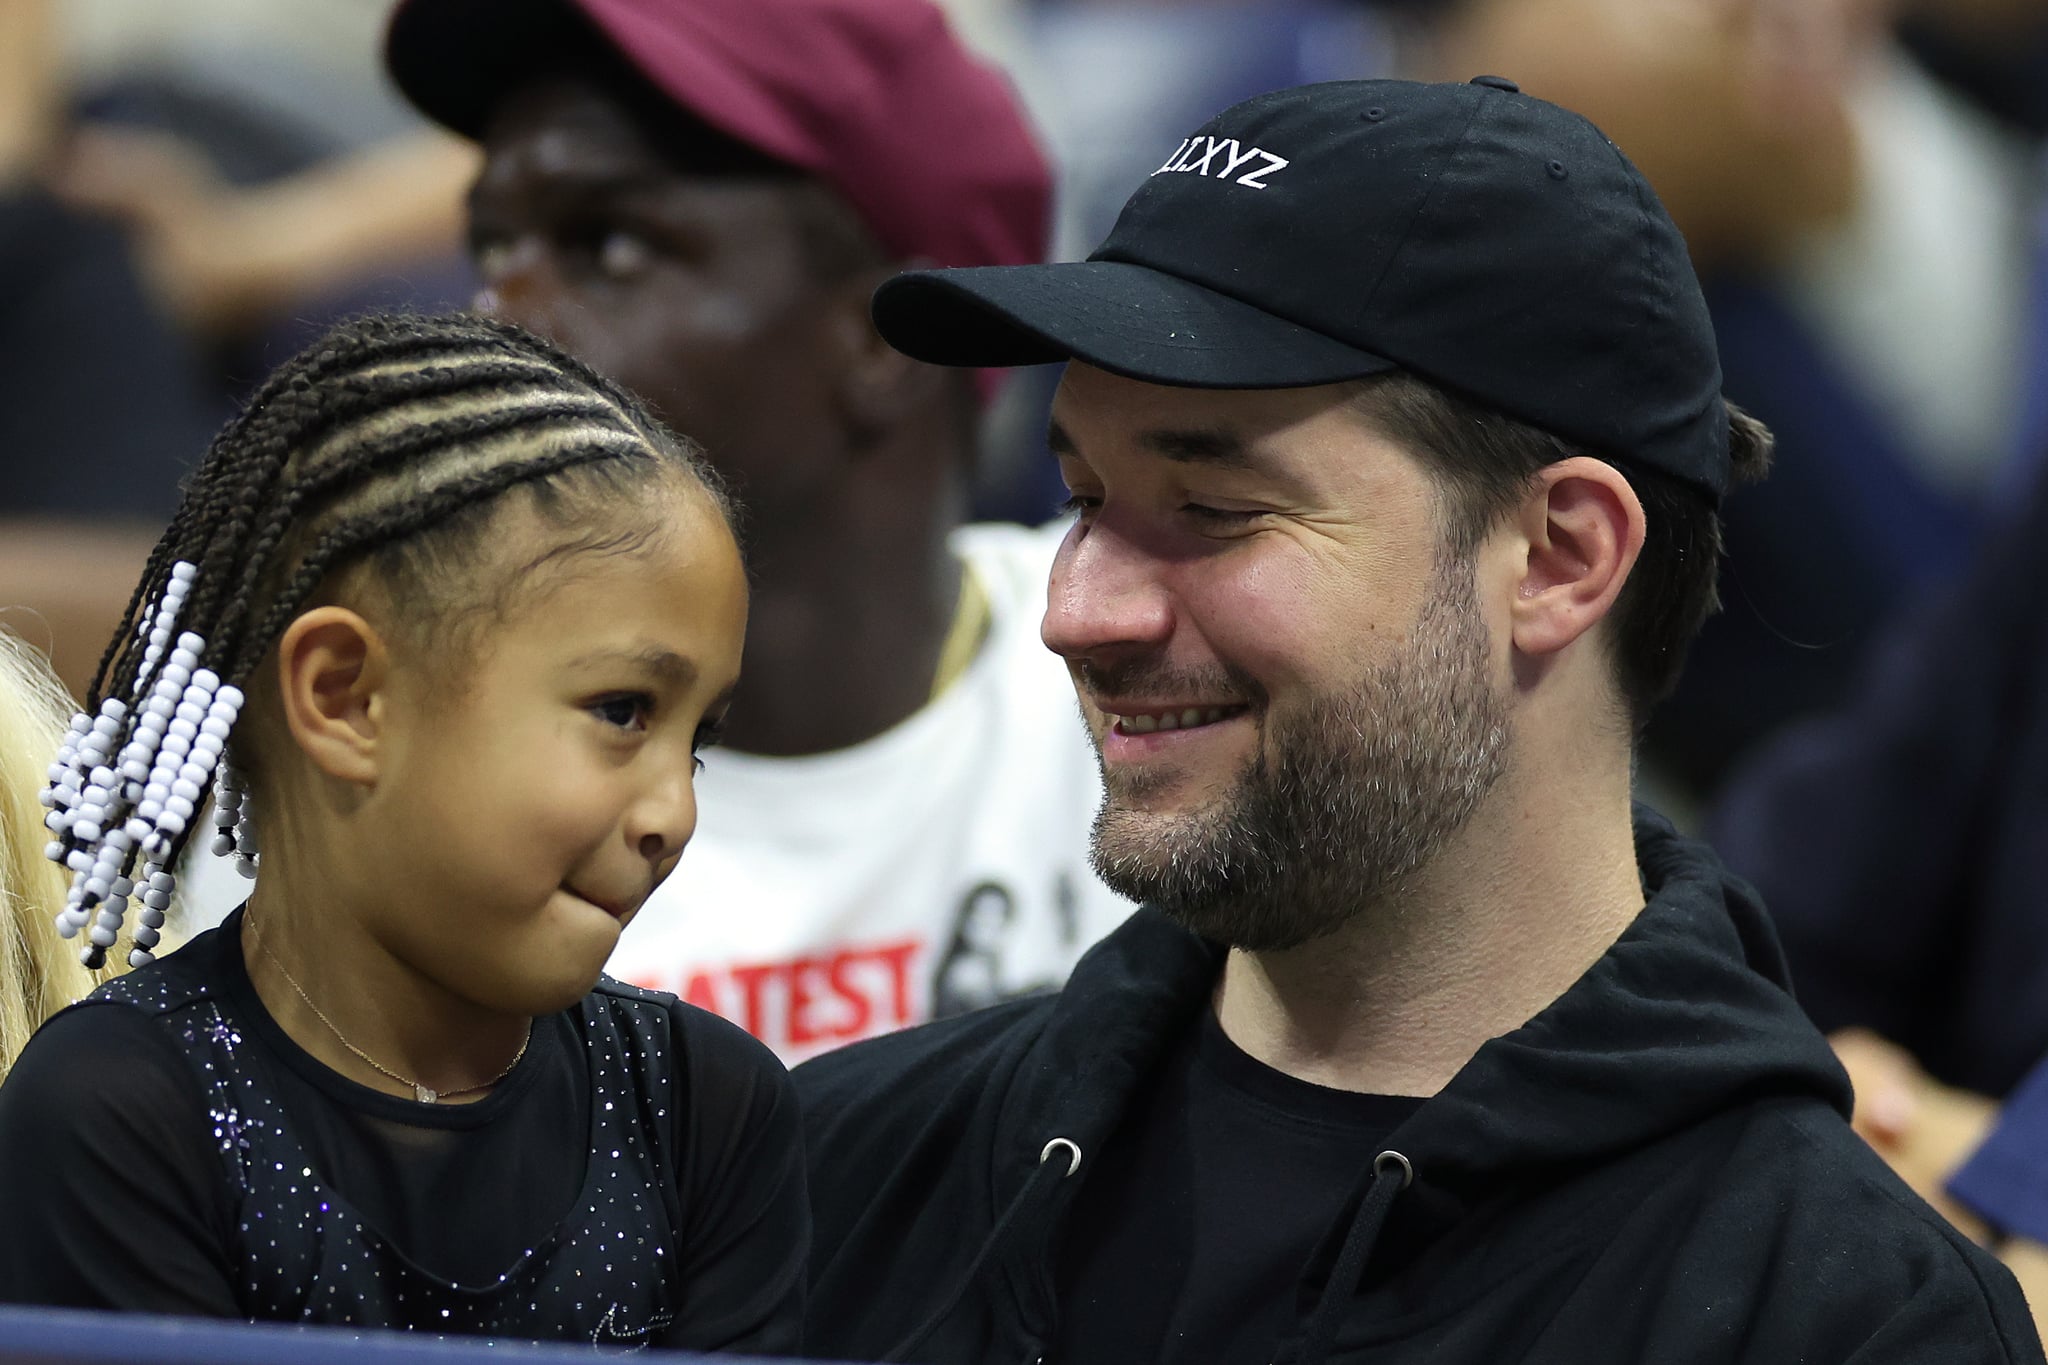 NEW YORK, NEW YORK - AUGUST 29: Alexis Olympia Ohanian Jr. and Alexis Ohanian, daughter and husband of Serena Williams of the United States, are seen prior to Serena's match against Danka Kovinic of Montenegro during the Women's Singles First Round on Day One of the 2022 US Open at USTA Billie Jean King National Tennis Center on August 29, 2022 in the Flushing neighborhood of the Queens borough of New York City. (Photo by Al Bello/Getty Images)